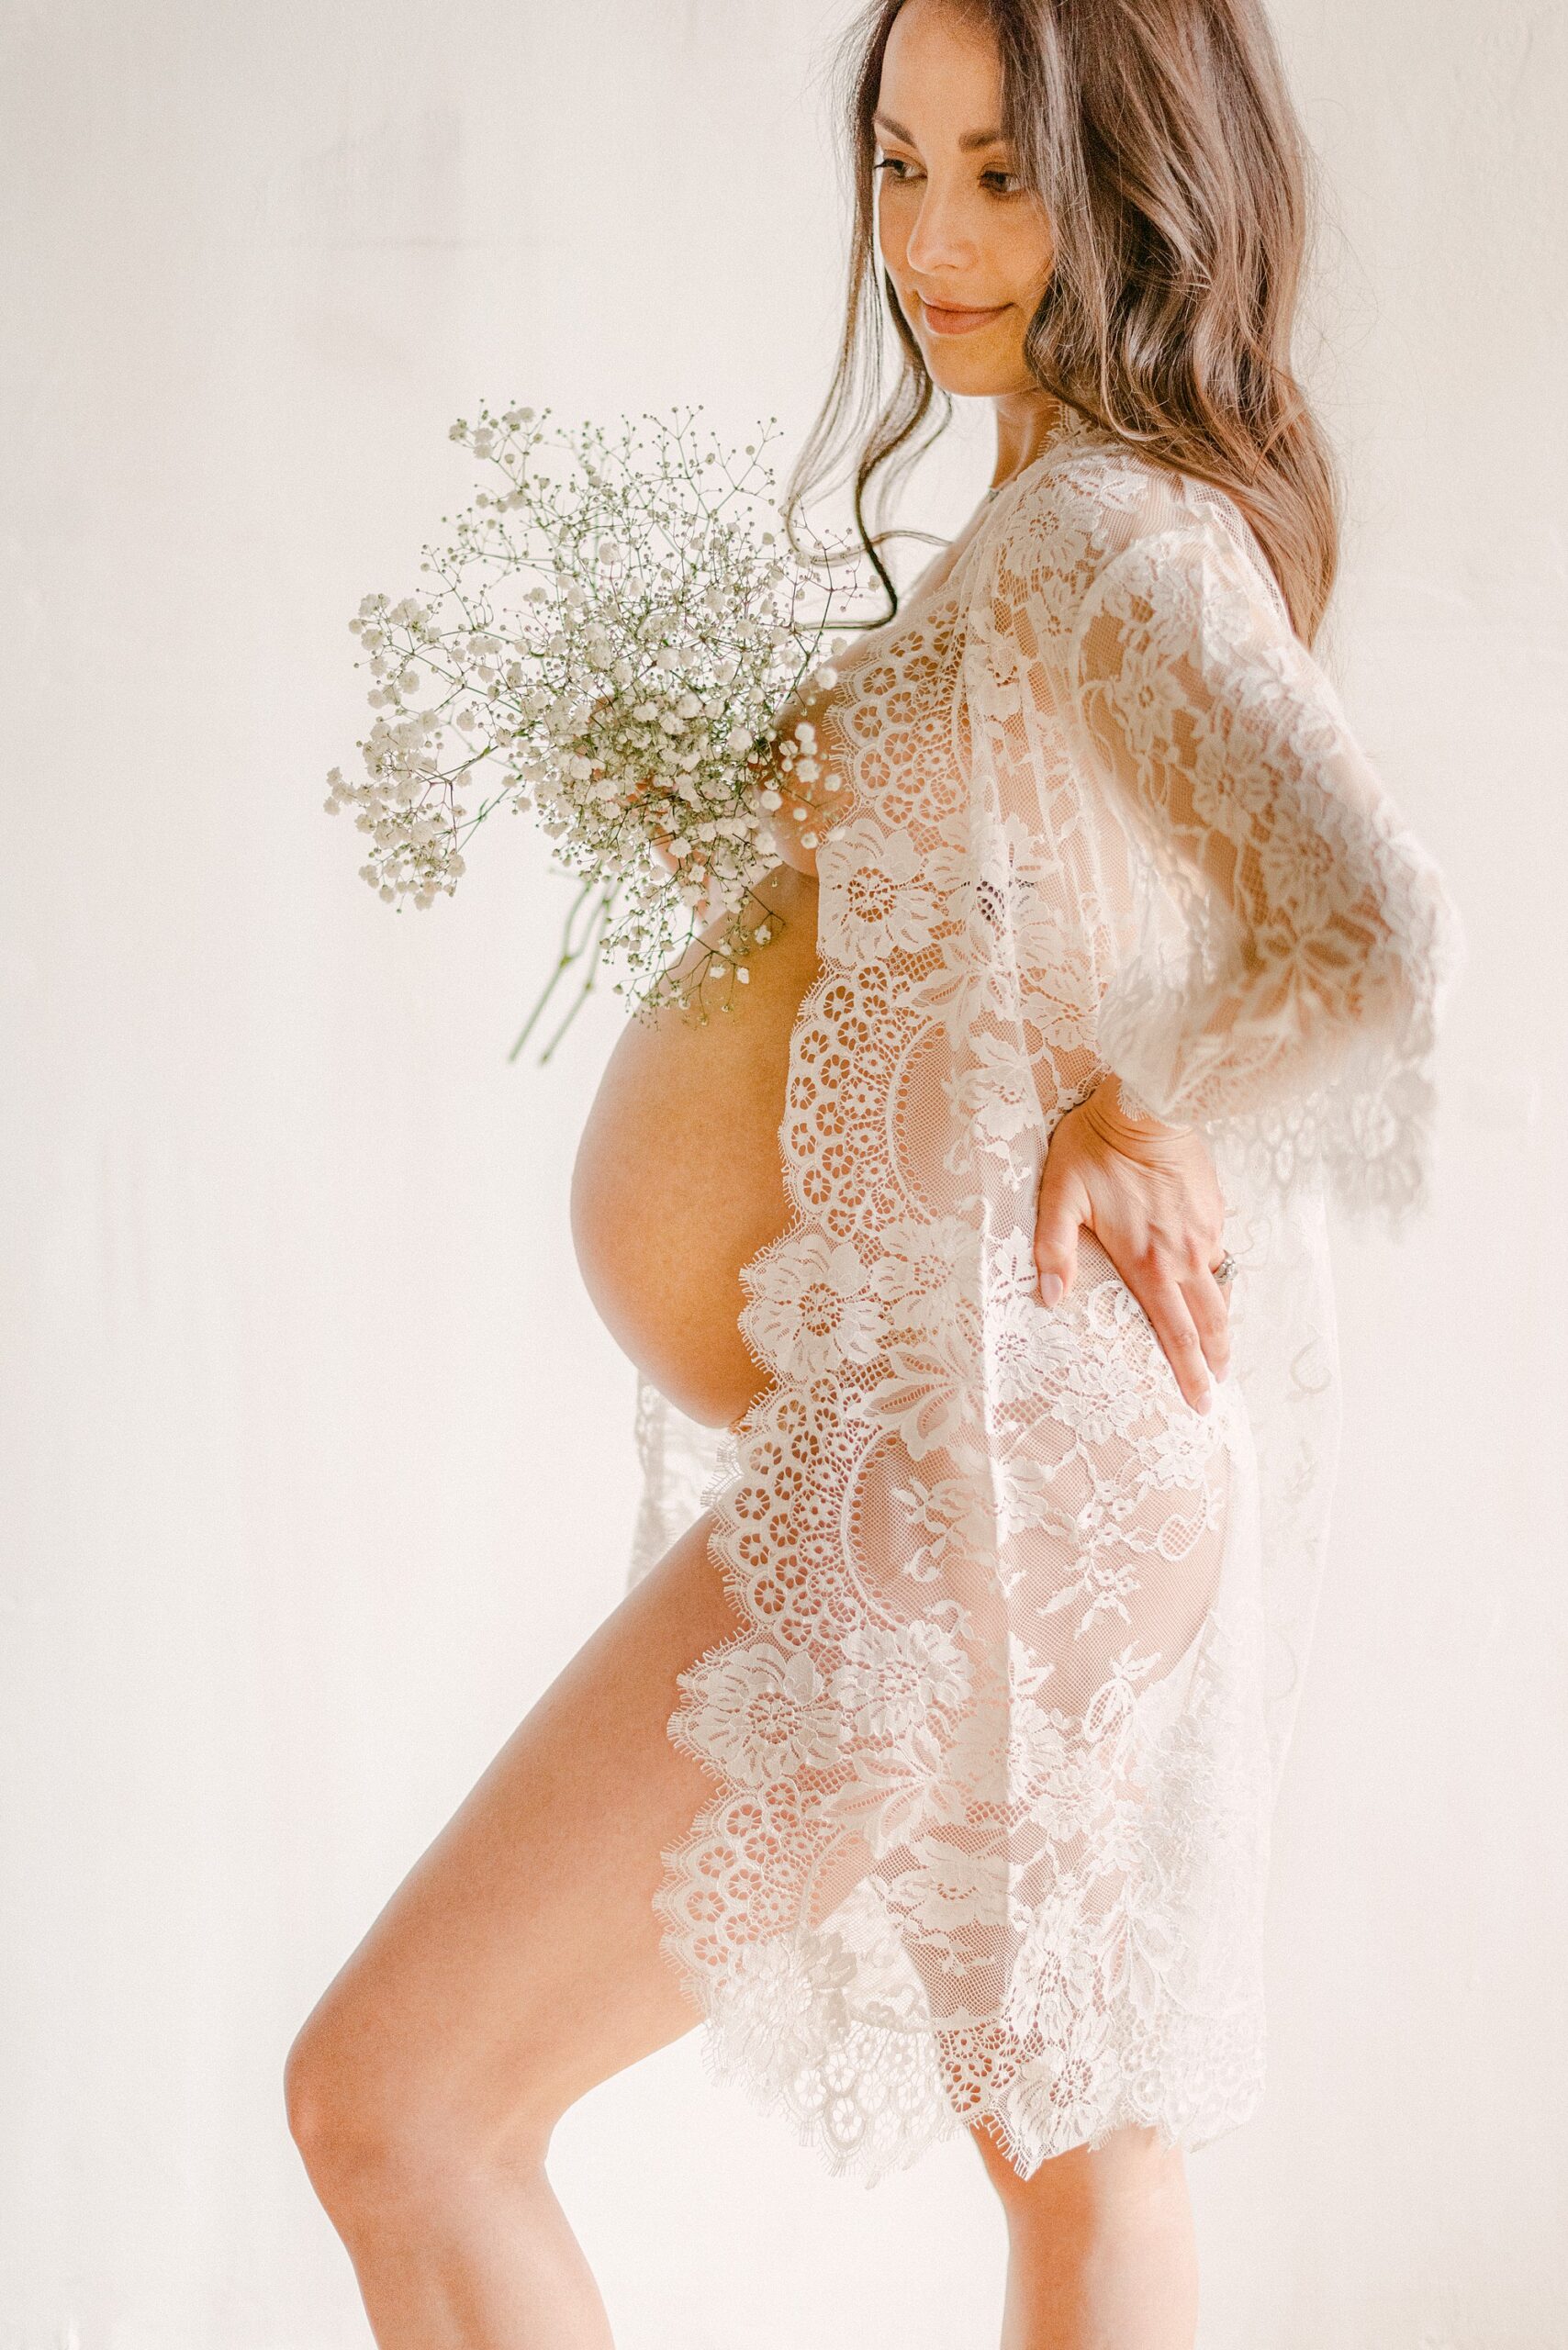 Mom to be in white lace robe holding baby's breath flowers above baby bump.